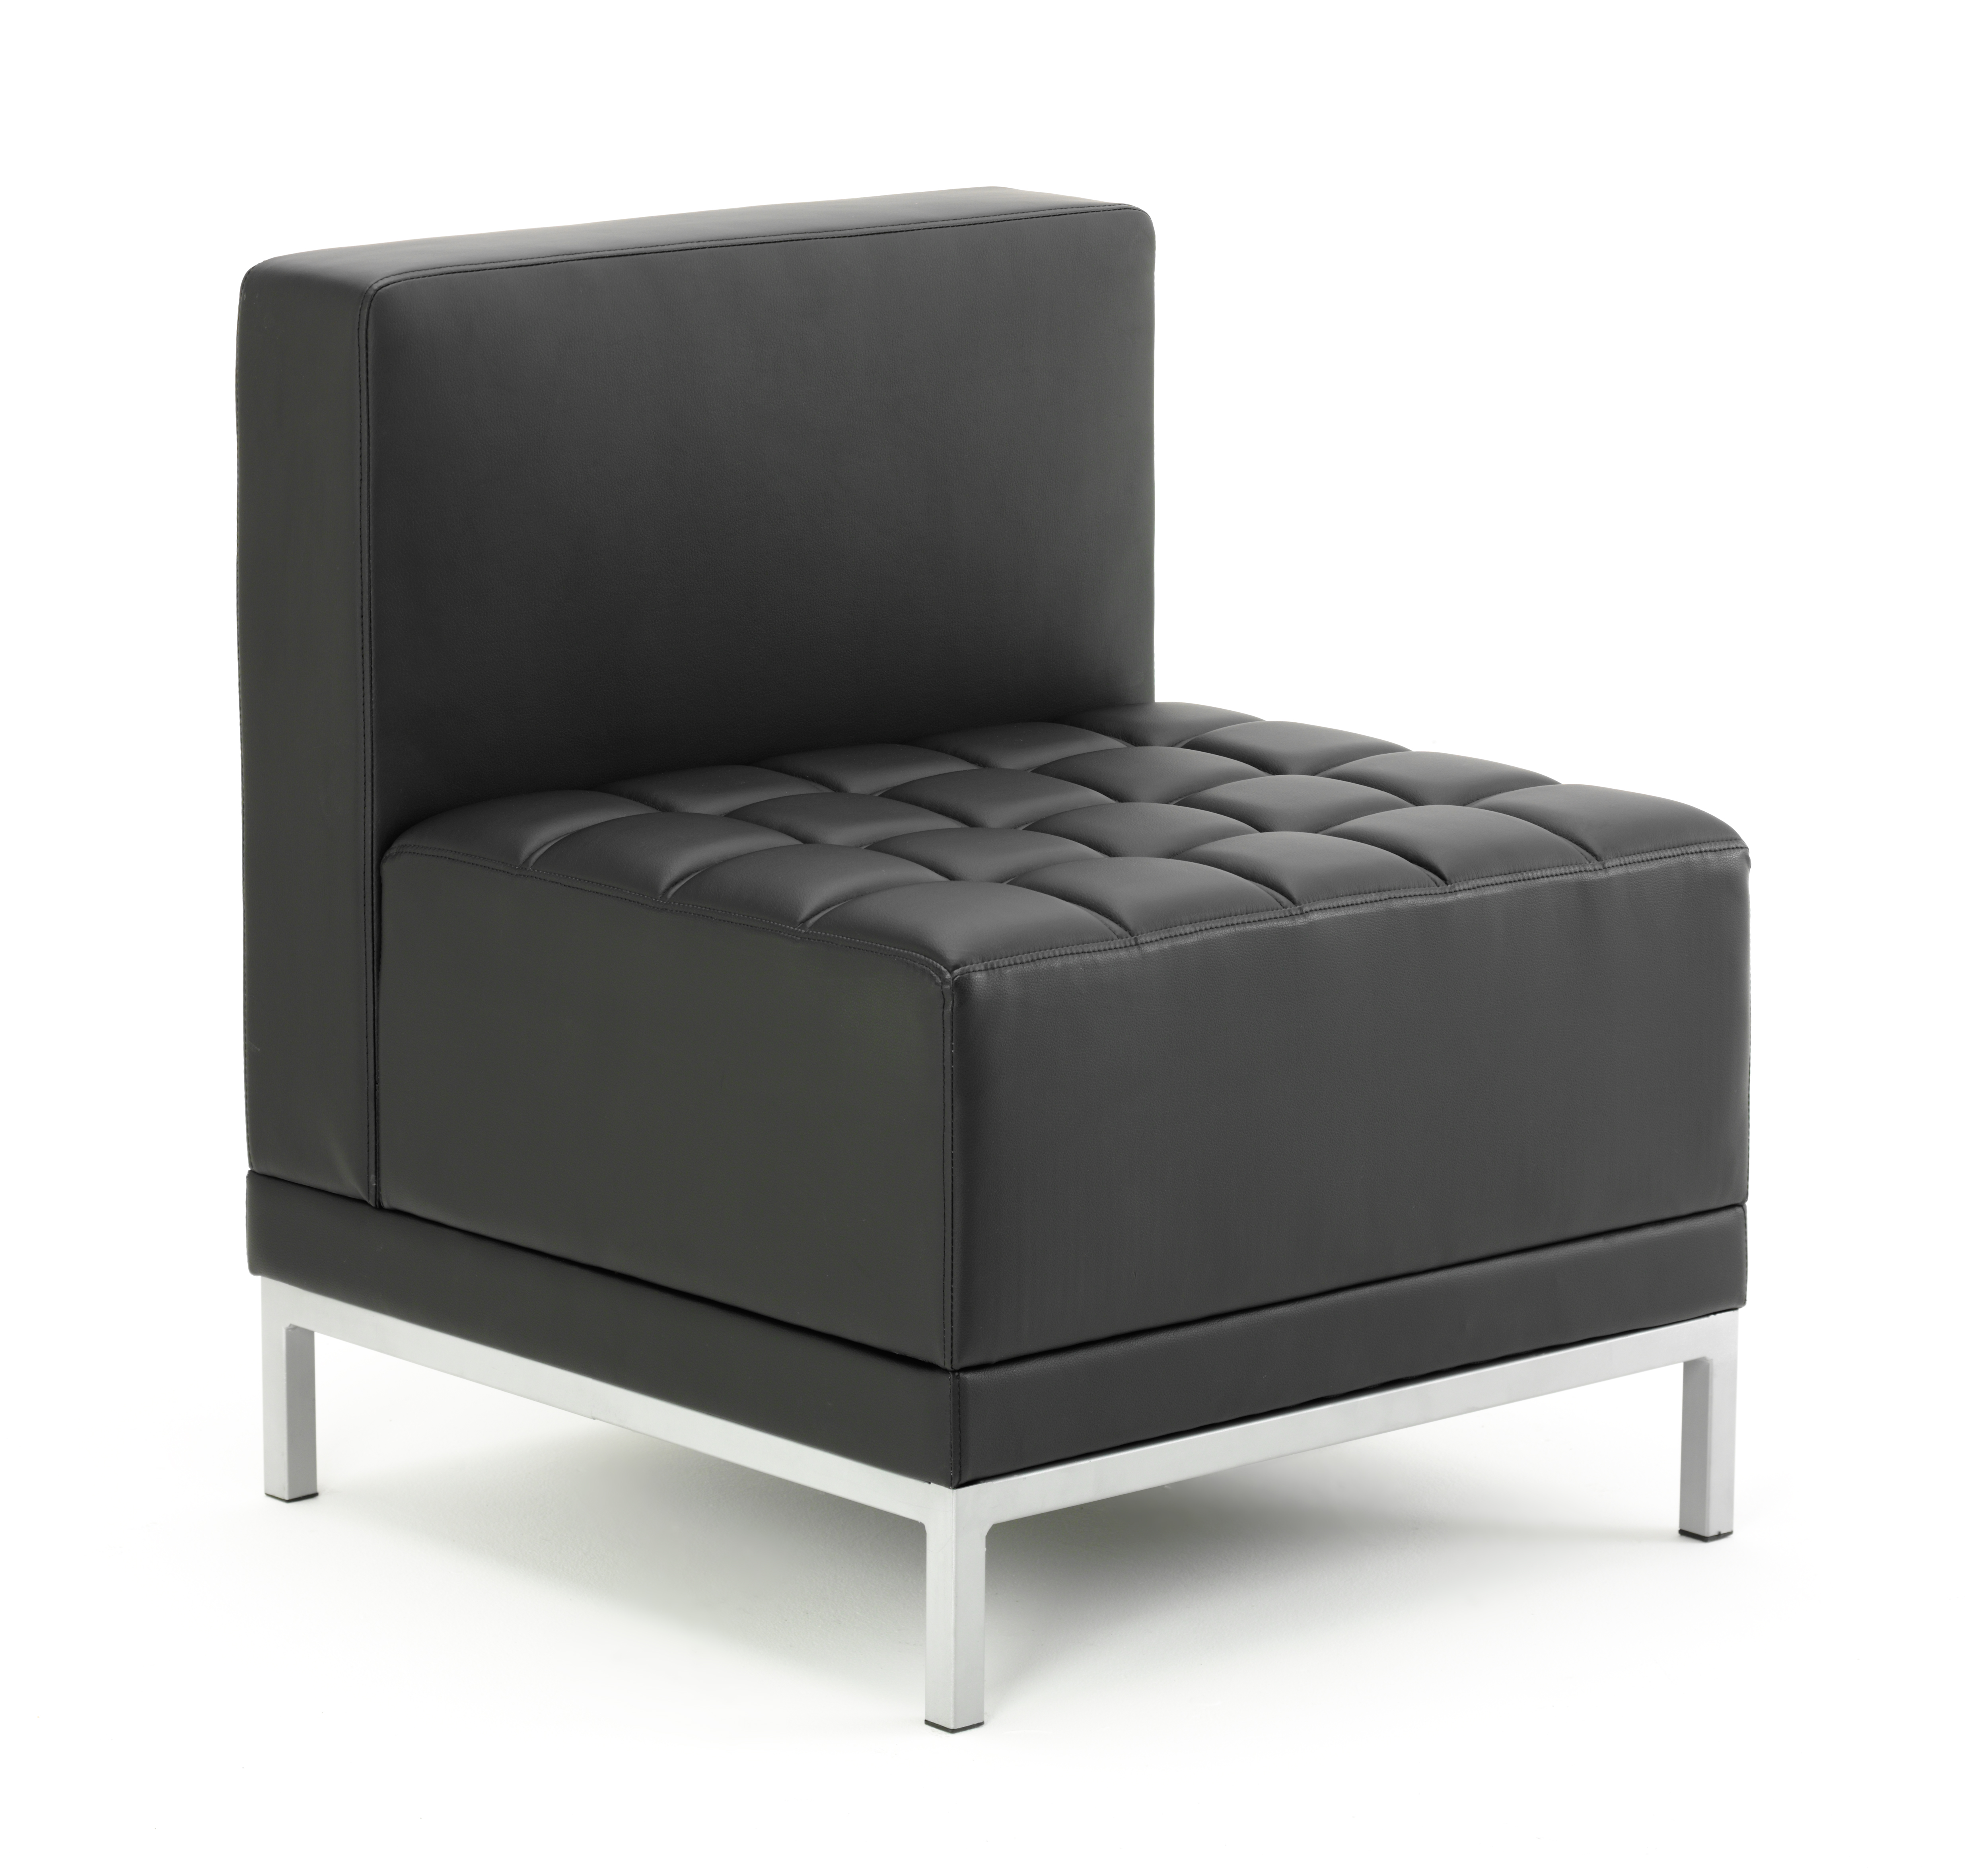 Reception Chairs Infinity Modular Straight Back Sofa Black Soft Bonded Leather BR000200